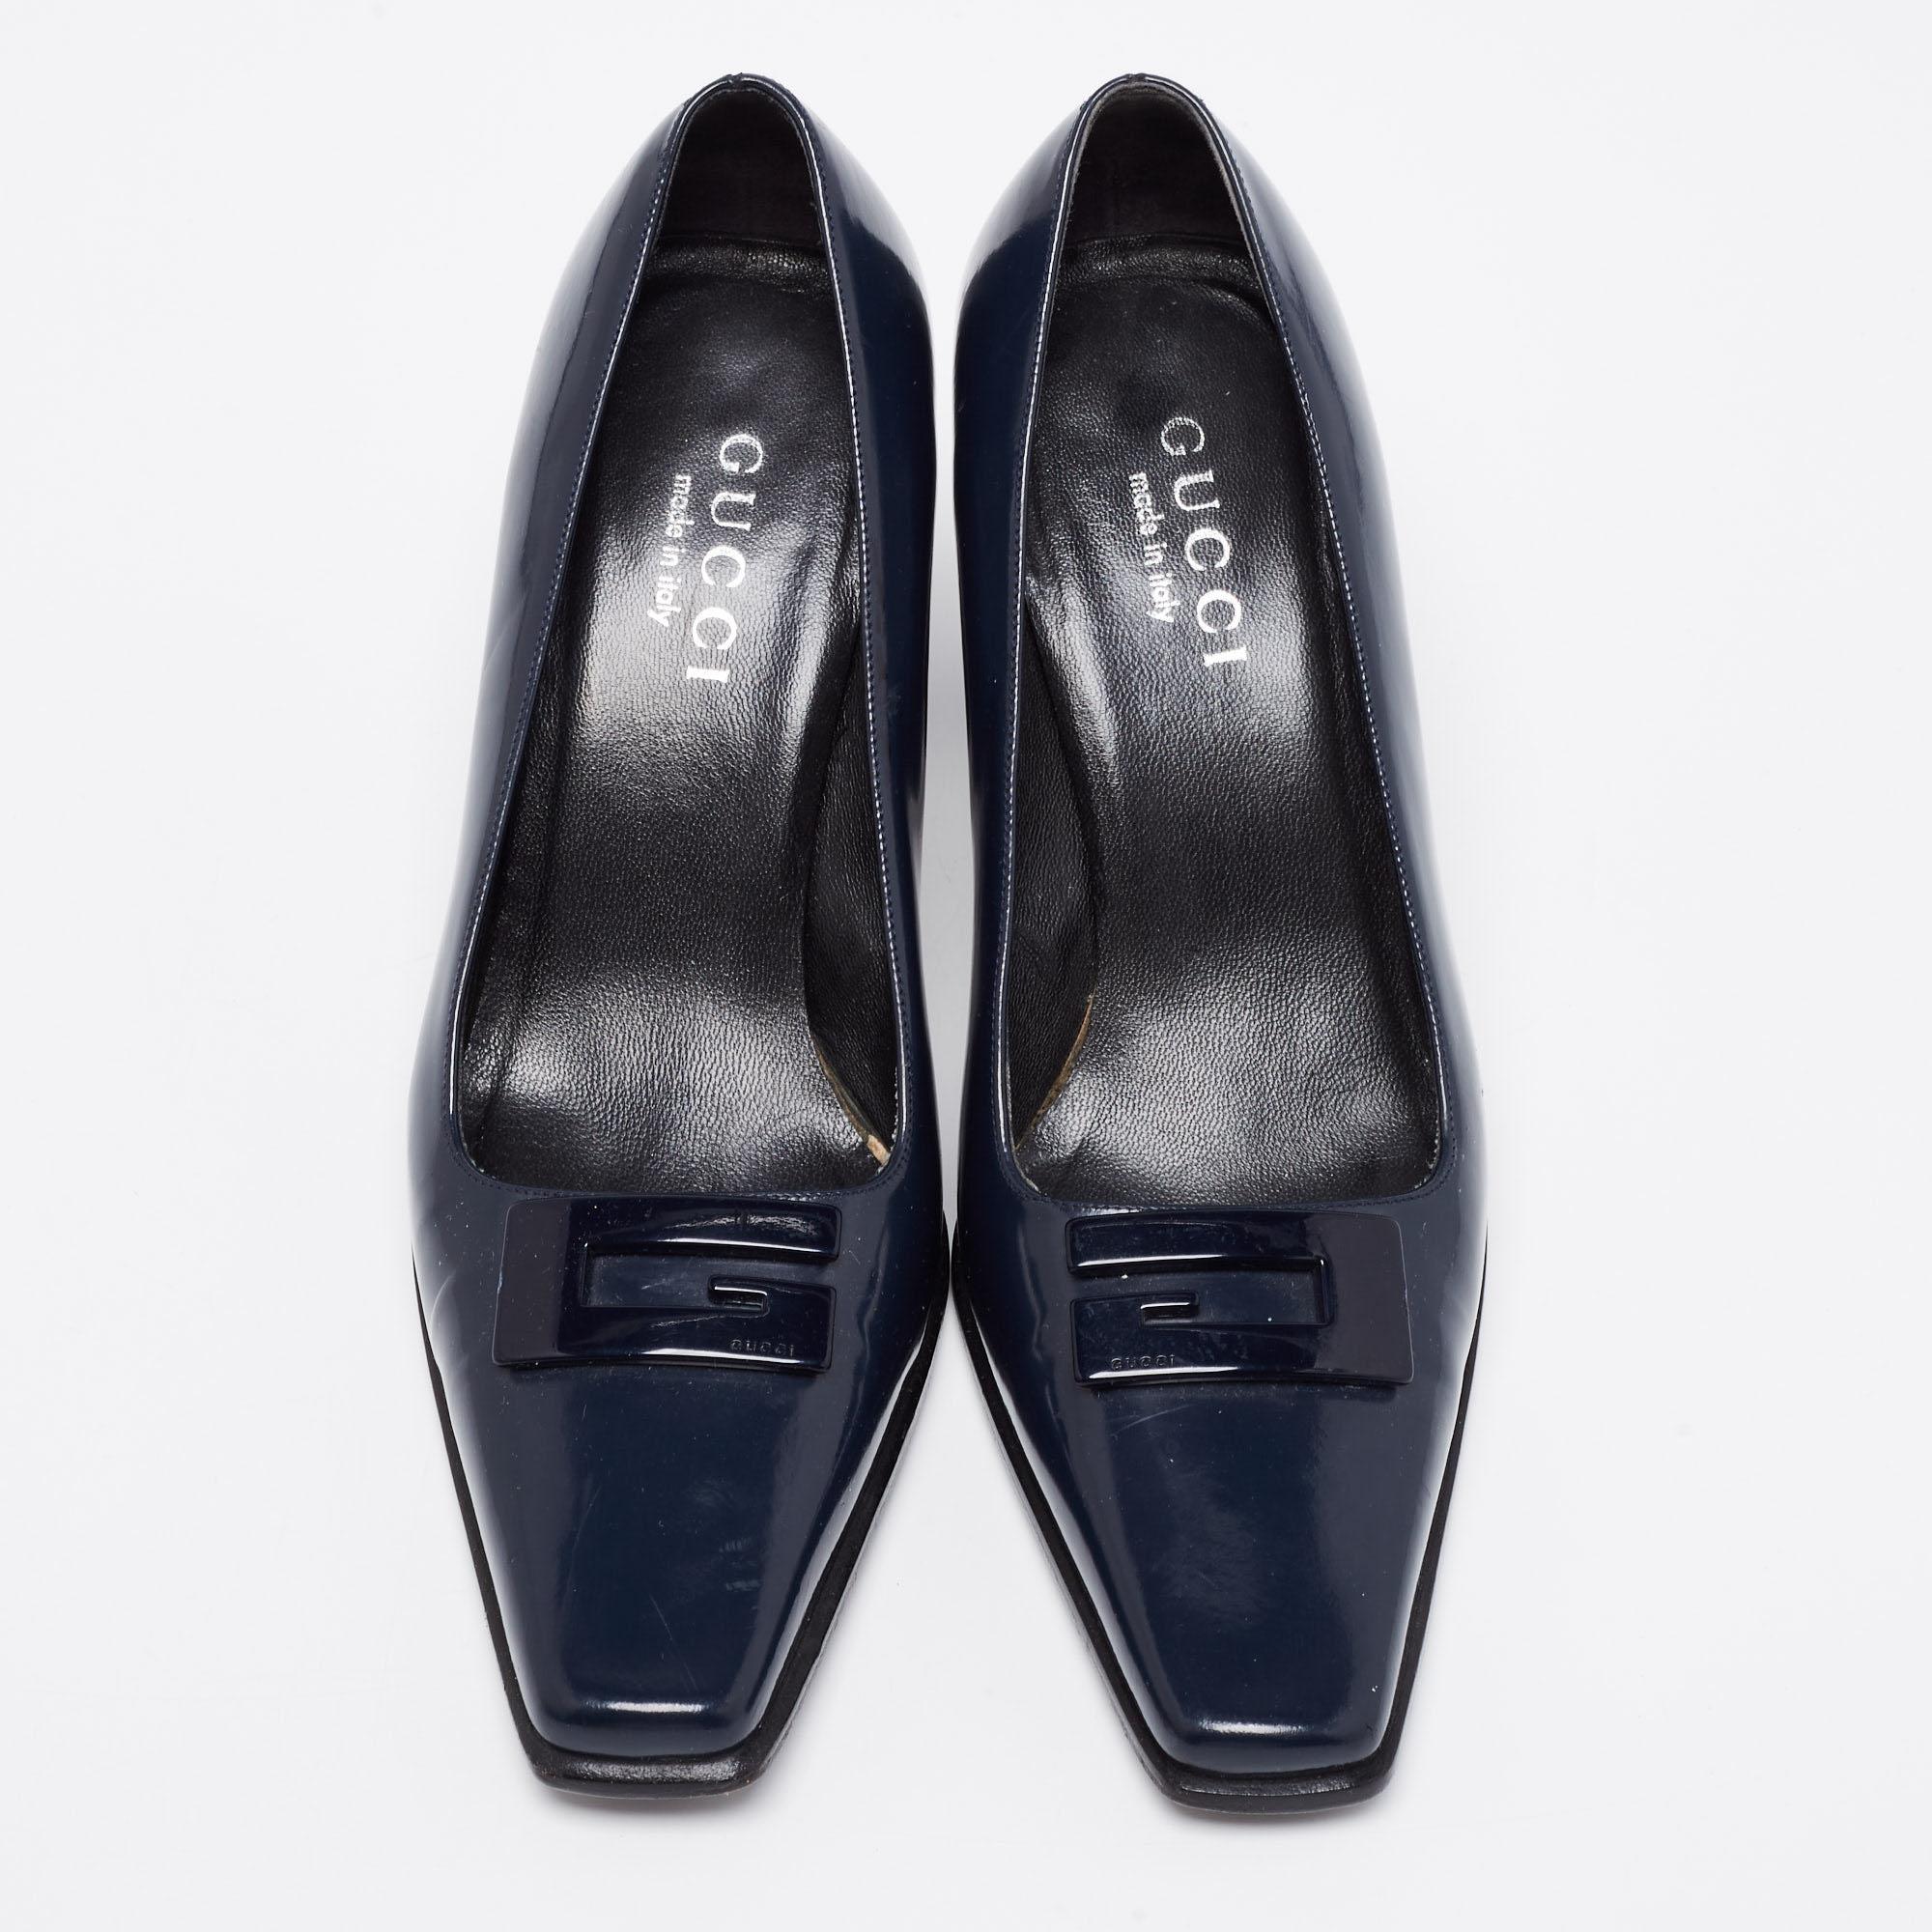 This stunning pair of pumps hails from the house of Gucci. They have been crafted from glossy patent leather in Italy and come in a lovely shade of midnight blue. They are styled with square toes, logo detailing on the uppers, and 7 cm heels.

